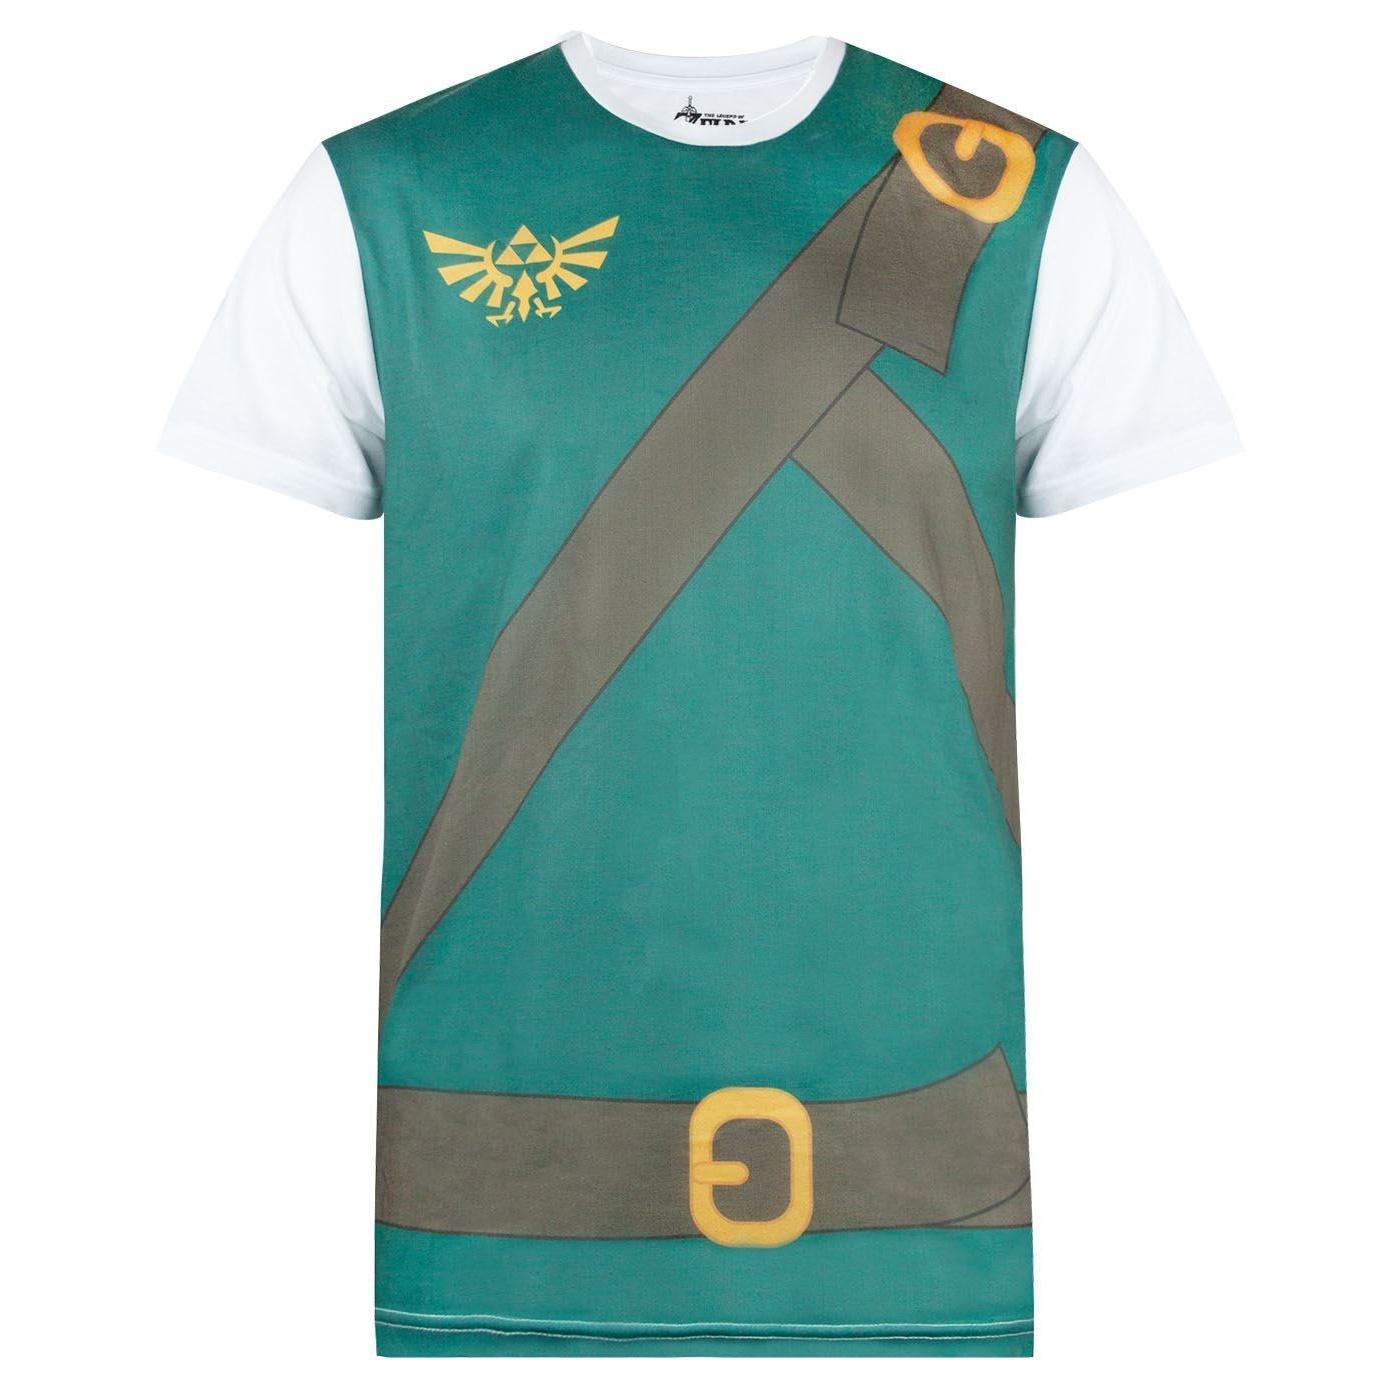 The Legend of Zelda Mens Classic Costume Cosplay T-Shirt (White/Green/Brown) (L)